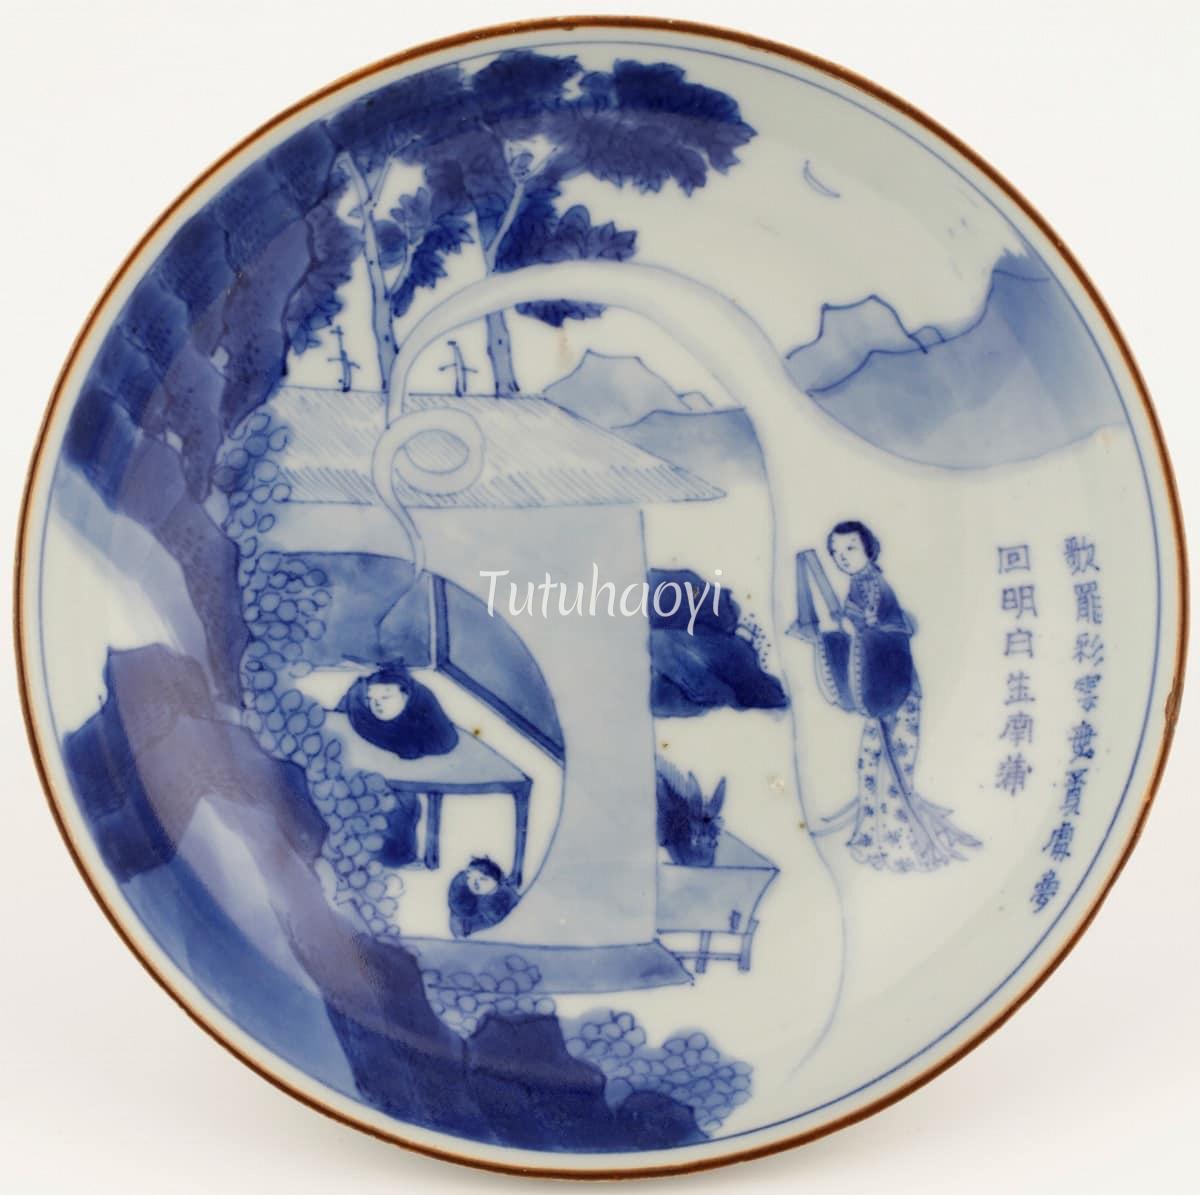 Butler dish Dream by the Qiantang River